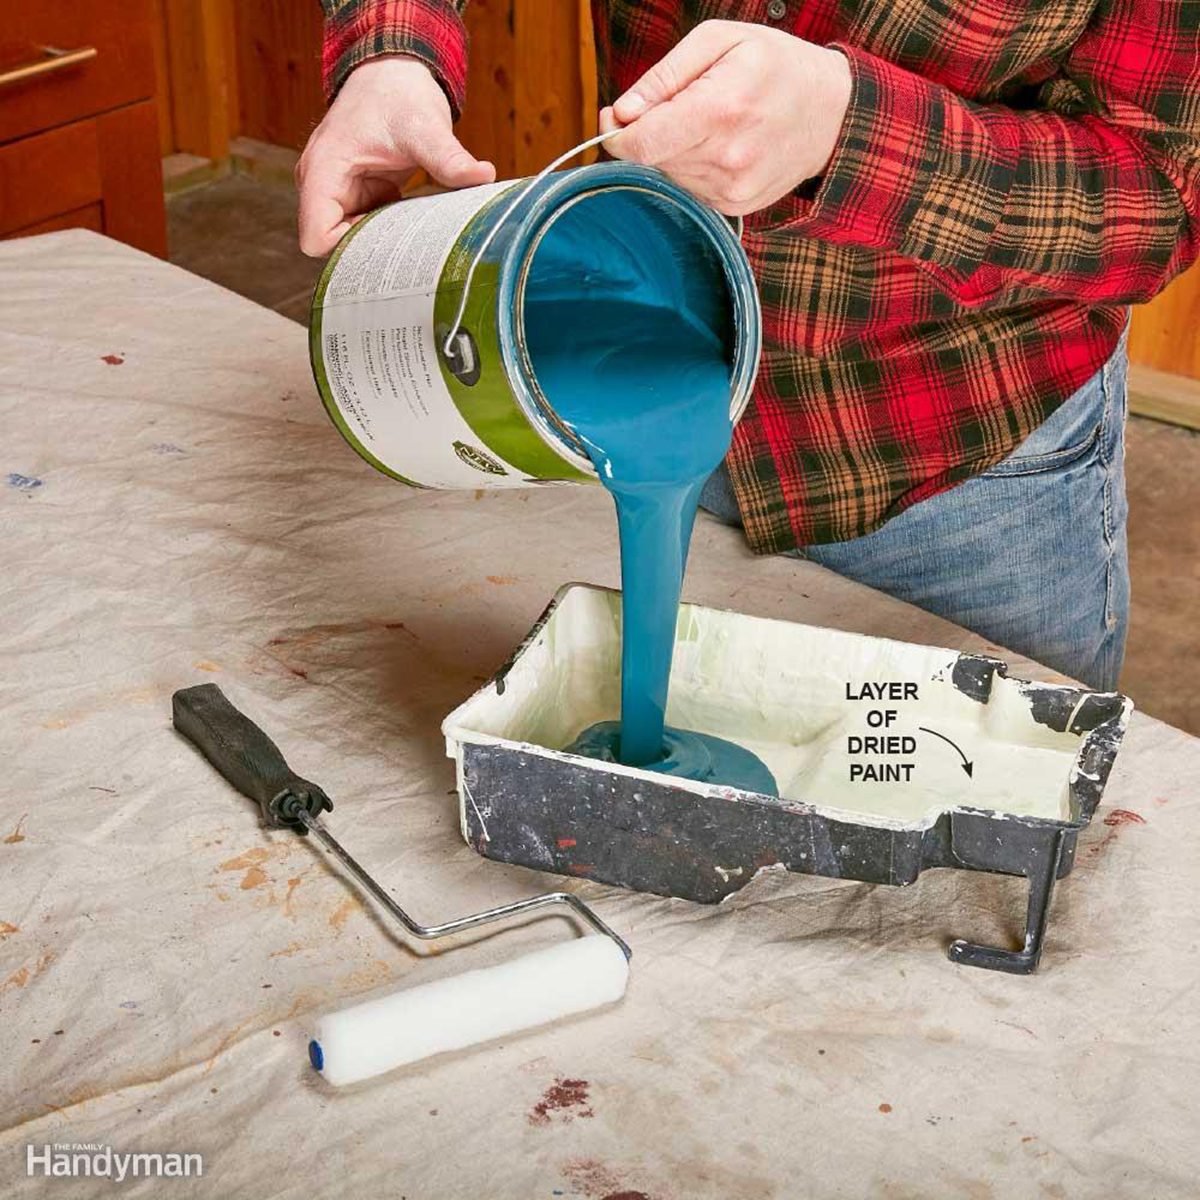 Pouring paint into a tray